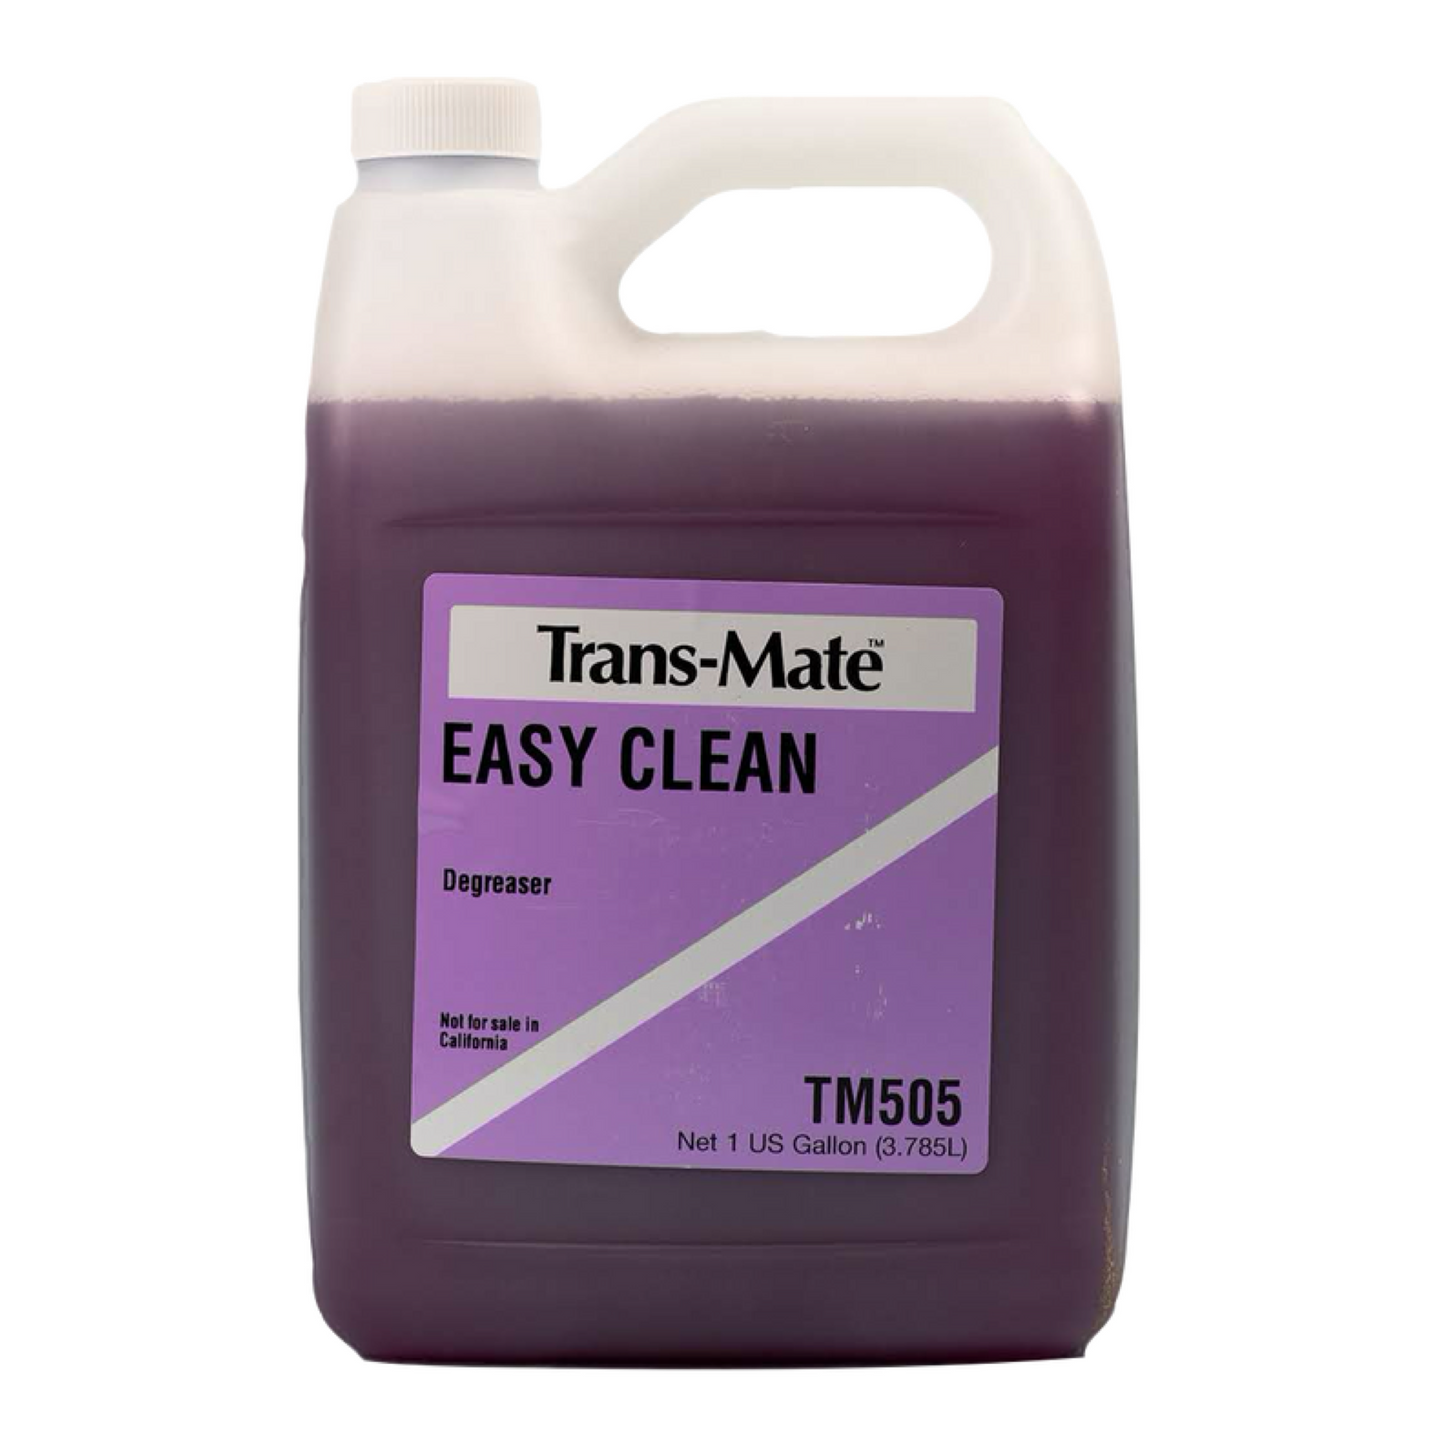 Trans-Mate Easy Clean Degreaser